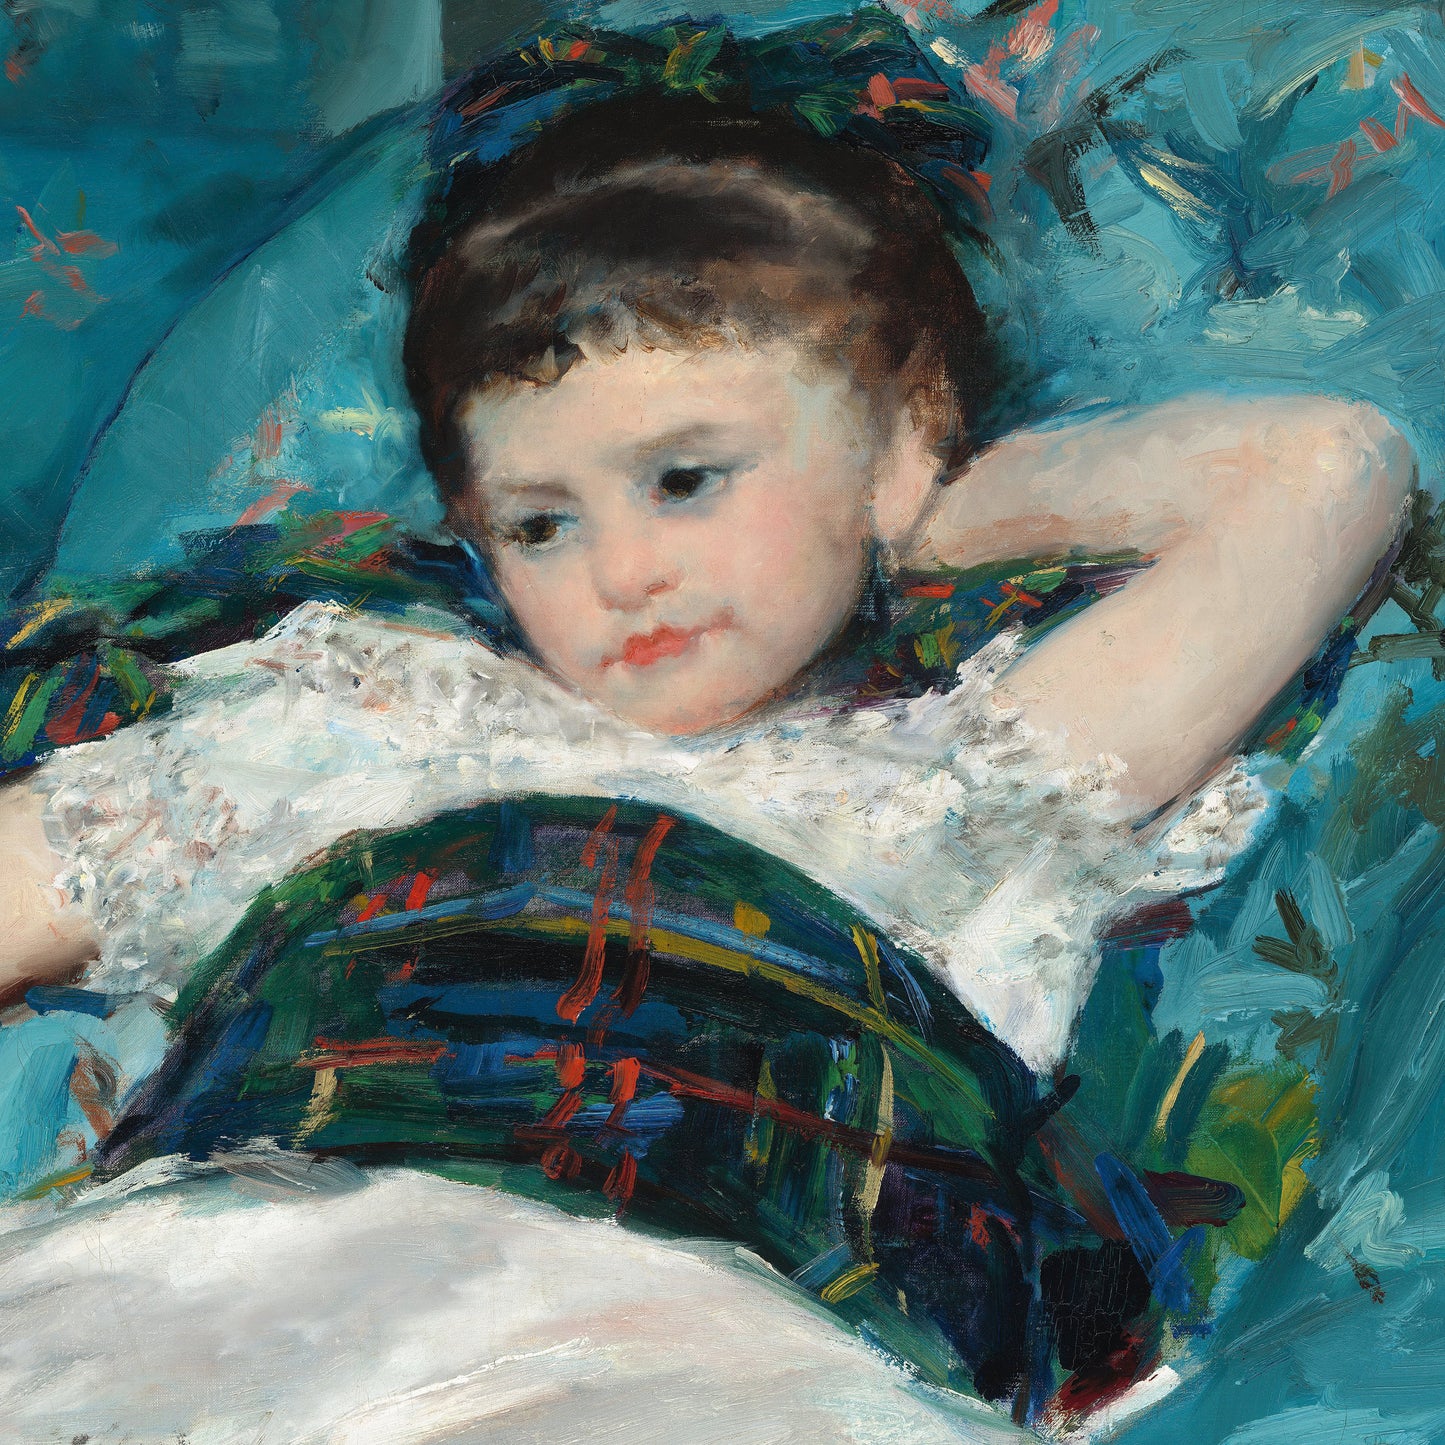 Little Girl in a Blue Armchair by Mary Cassatt, 3d Printed with texture and brush strokes looks like original oil-painting, code:107